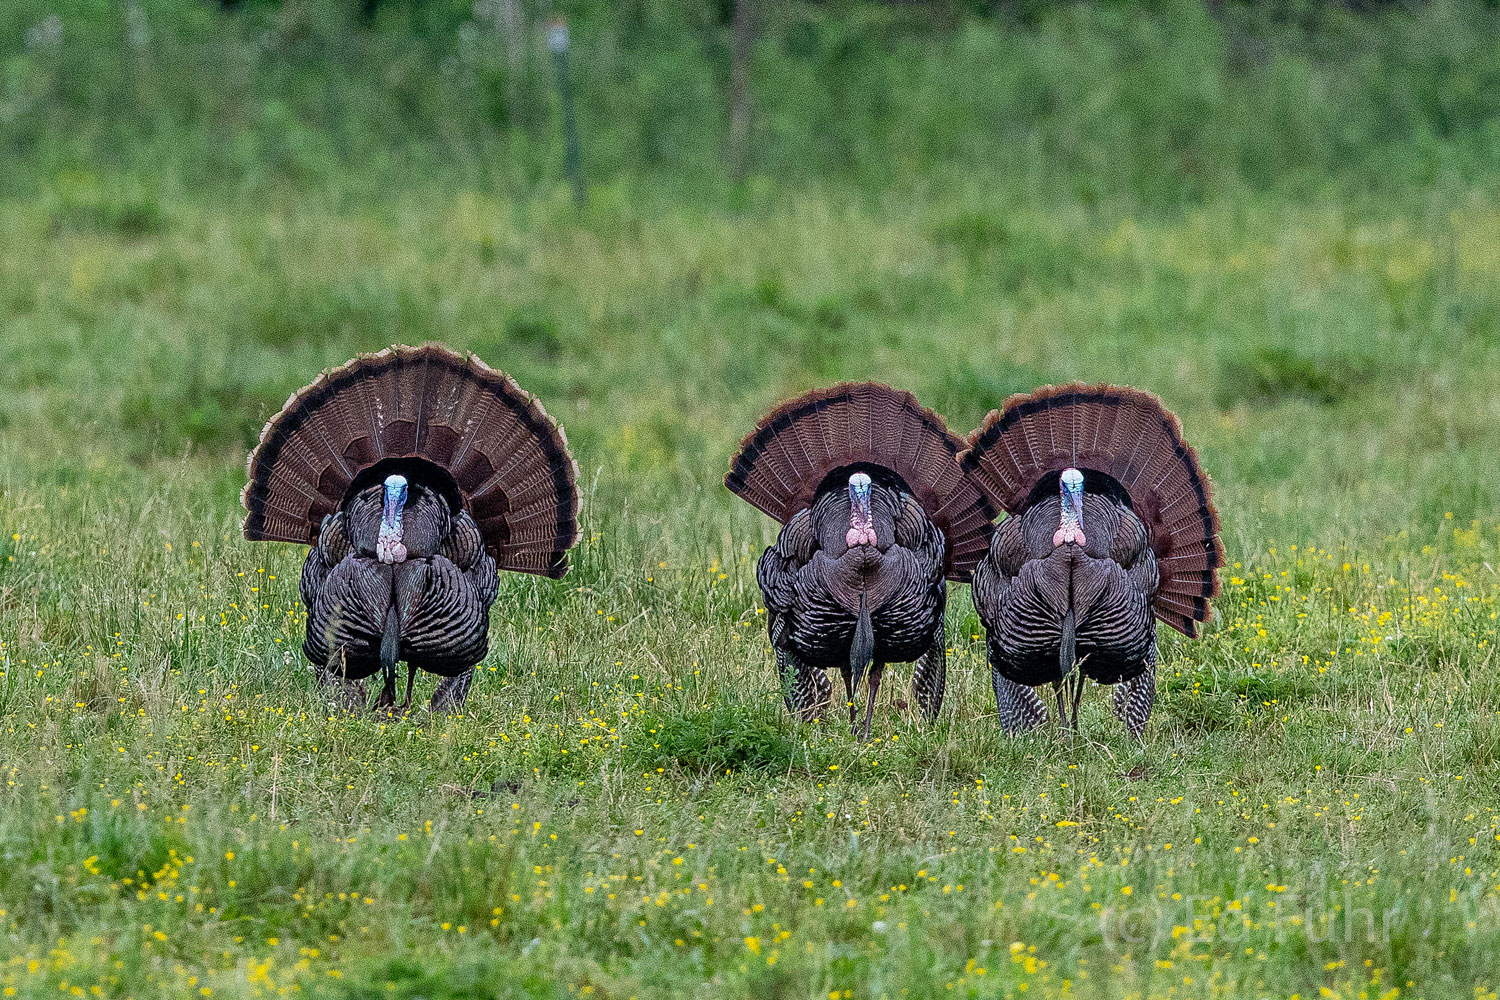 Three tom turkeys strut and display their feathers as they compete to woo the attention of some nearby ladies.